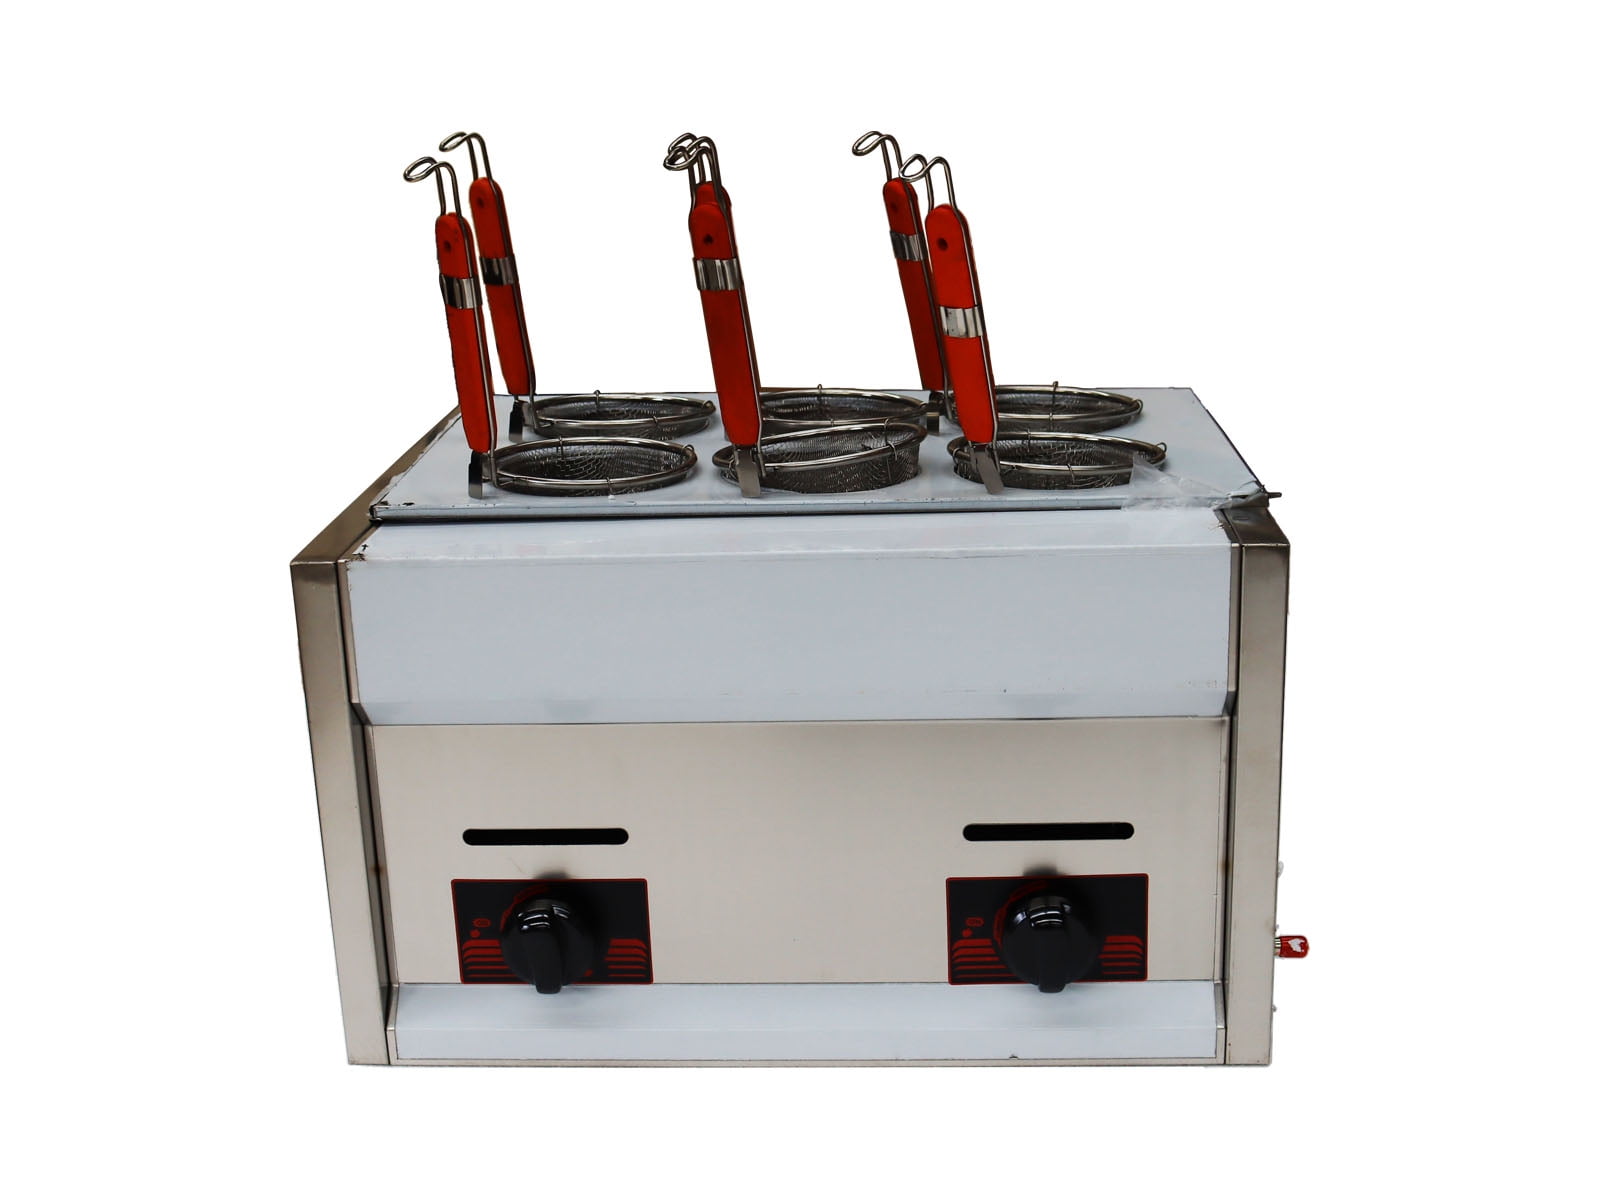 TECHTONGDA Commercial Table Top 4 Baskets Electric Noodles Cooker / Pasta  Cooking Machine 220V 4000W 